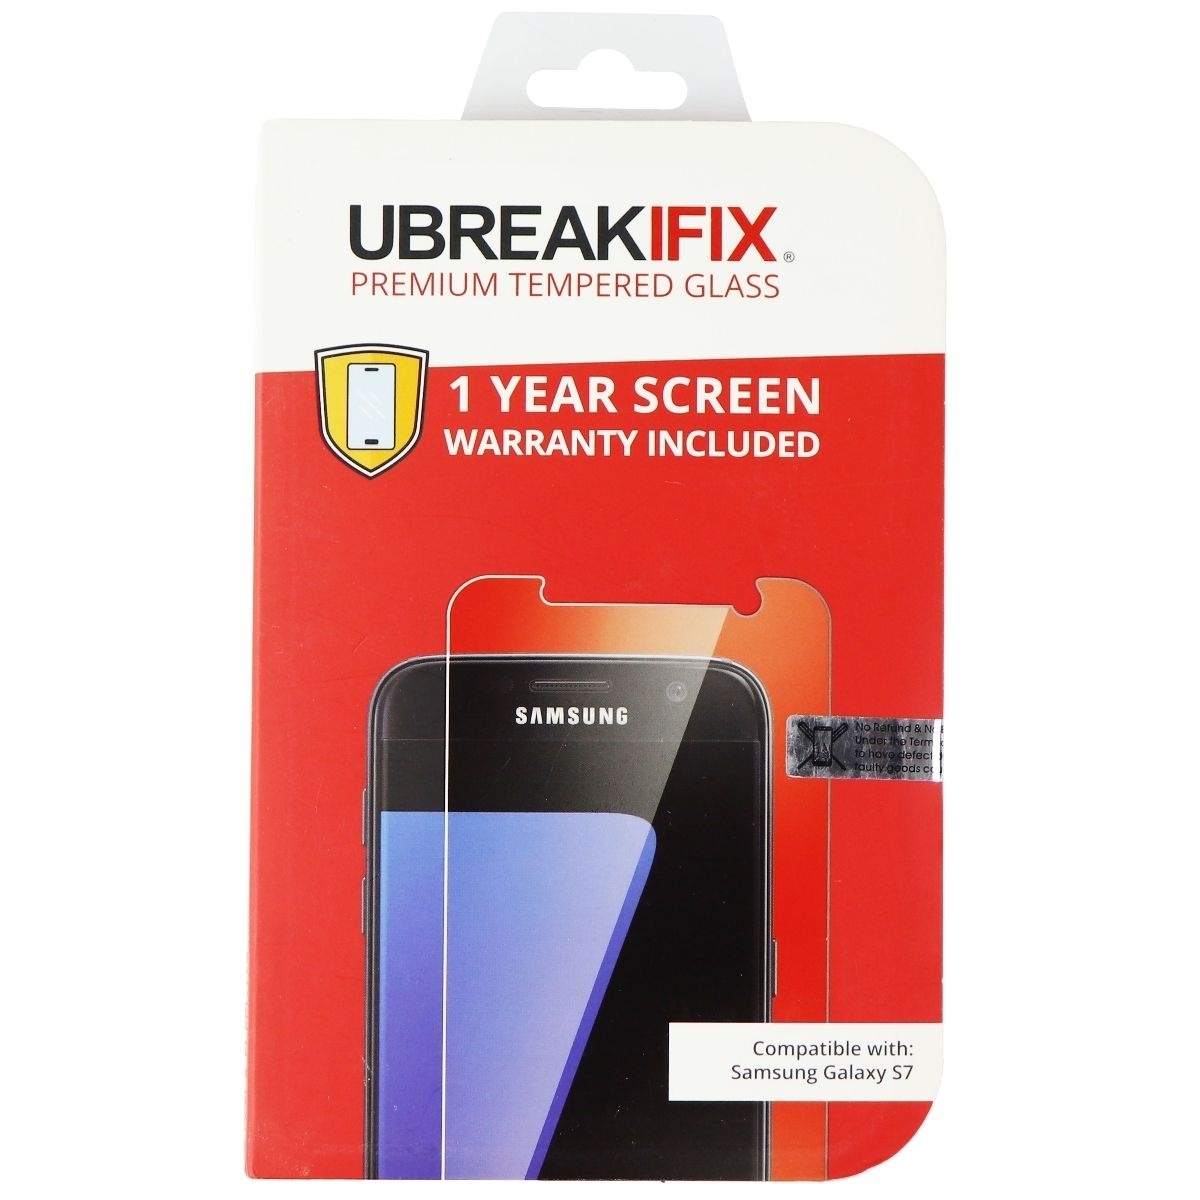 UBREAKIFIX Premium Tempered Glass For Samsung Galaxy S7 - Clear